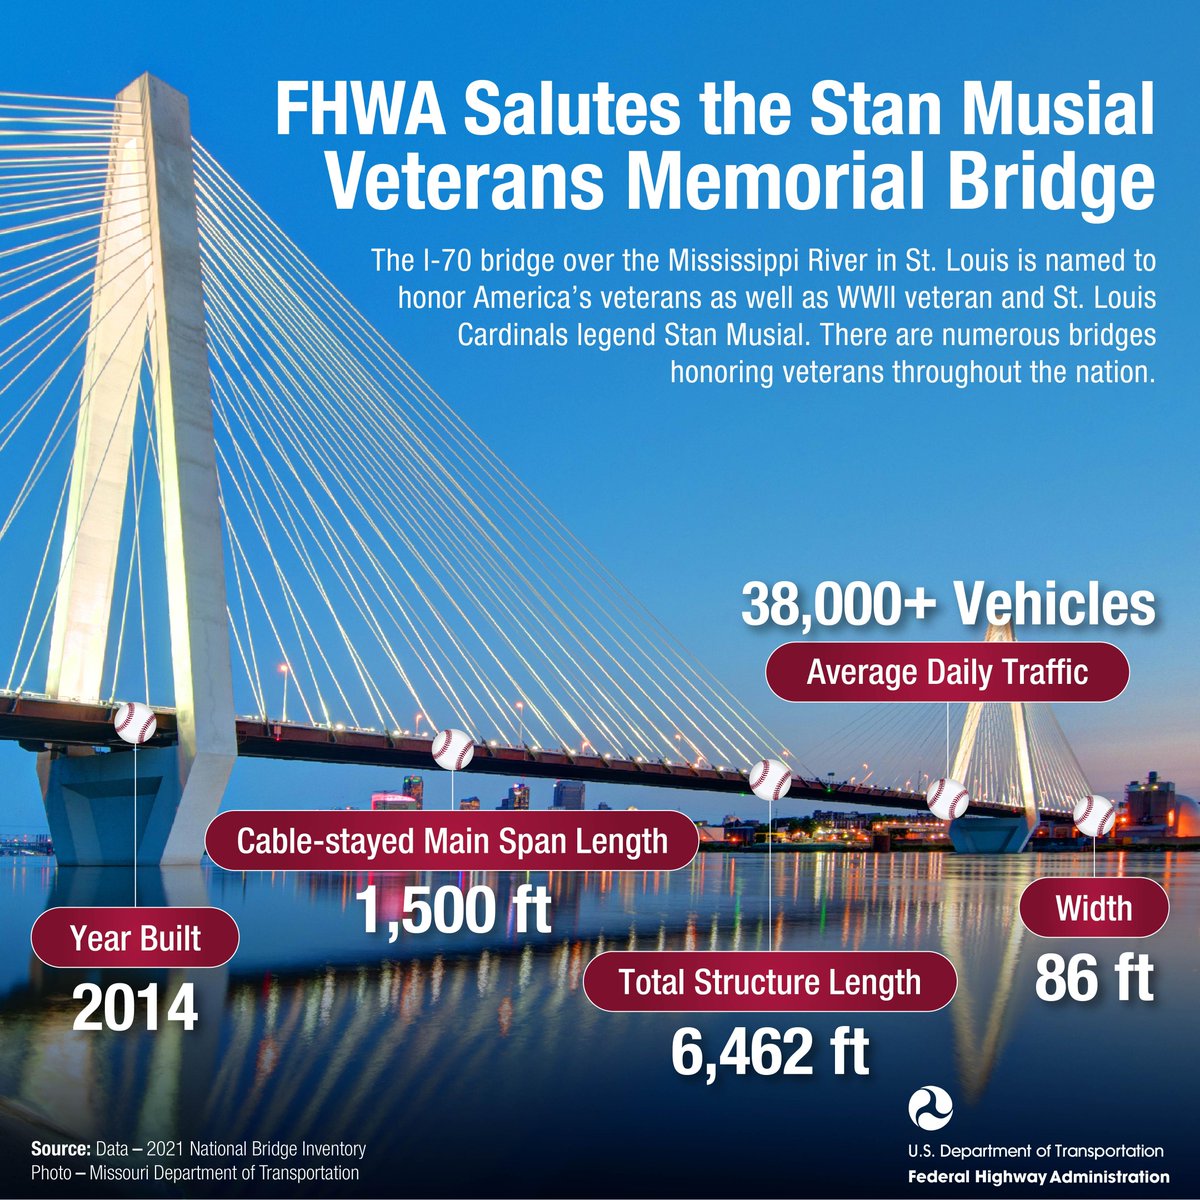 FHWA salutes the Stan Musial Veterans Memorial Bridge. The I-70 bridge over the Mississippi River in St. Louis is named to honor America’s veterans as well as WWII veteran and St. Louis Cardinals legend Stan Musial. #MemorialDay